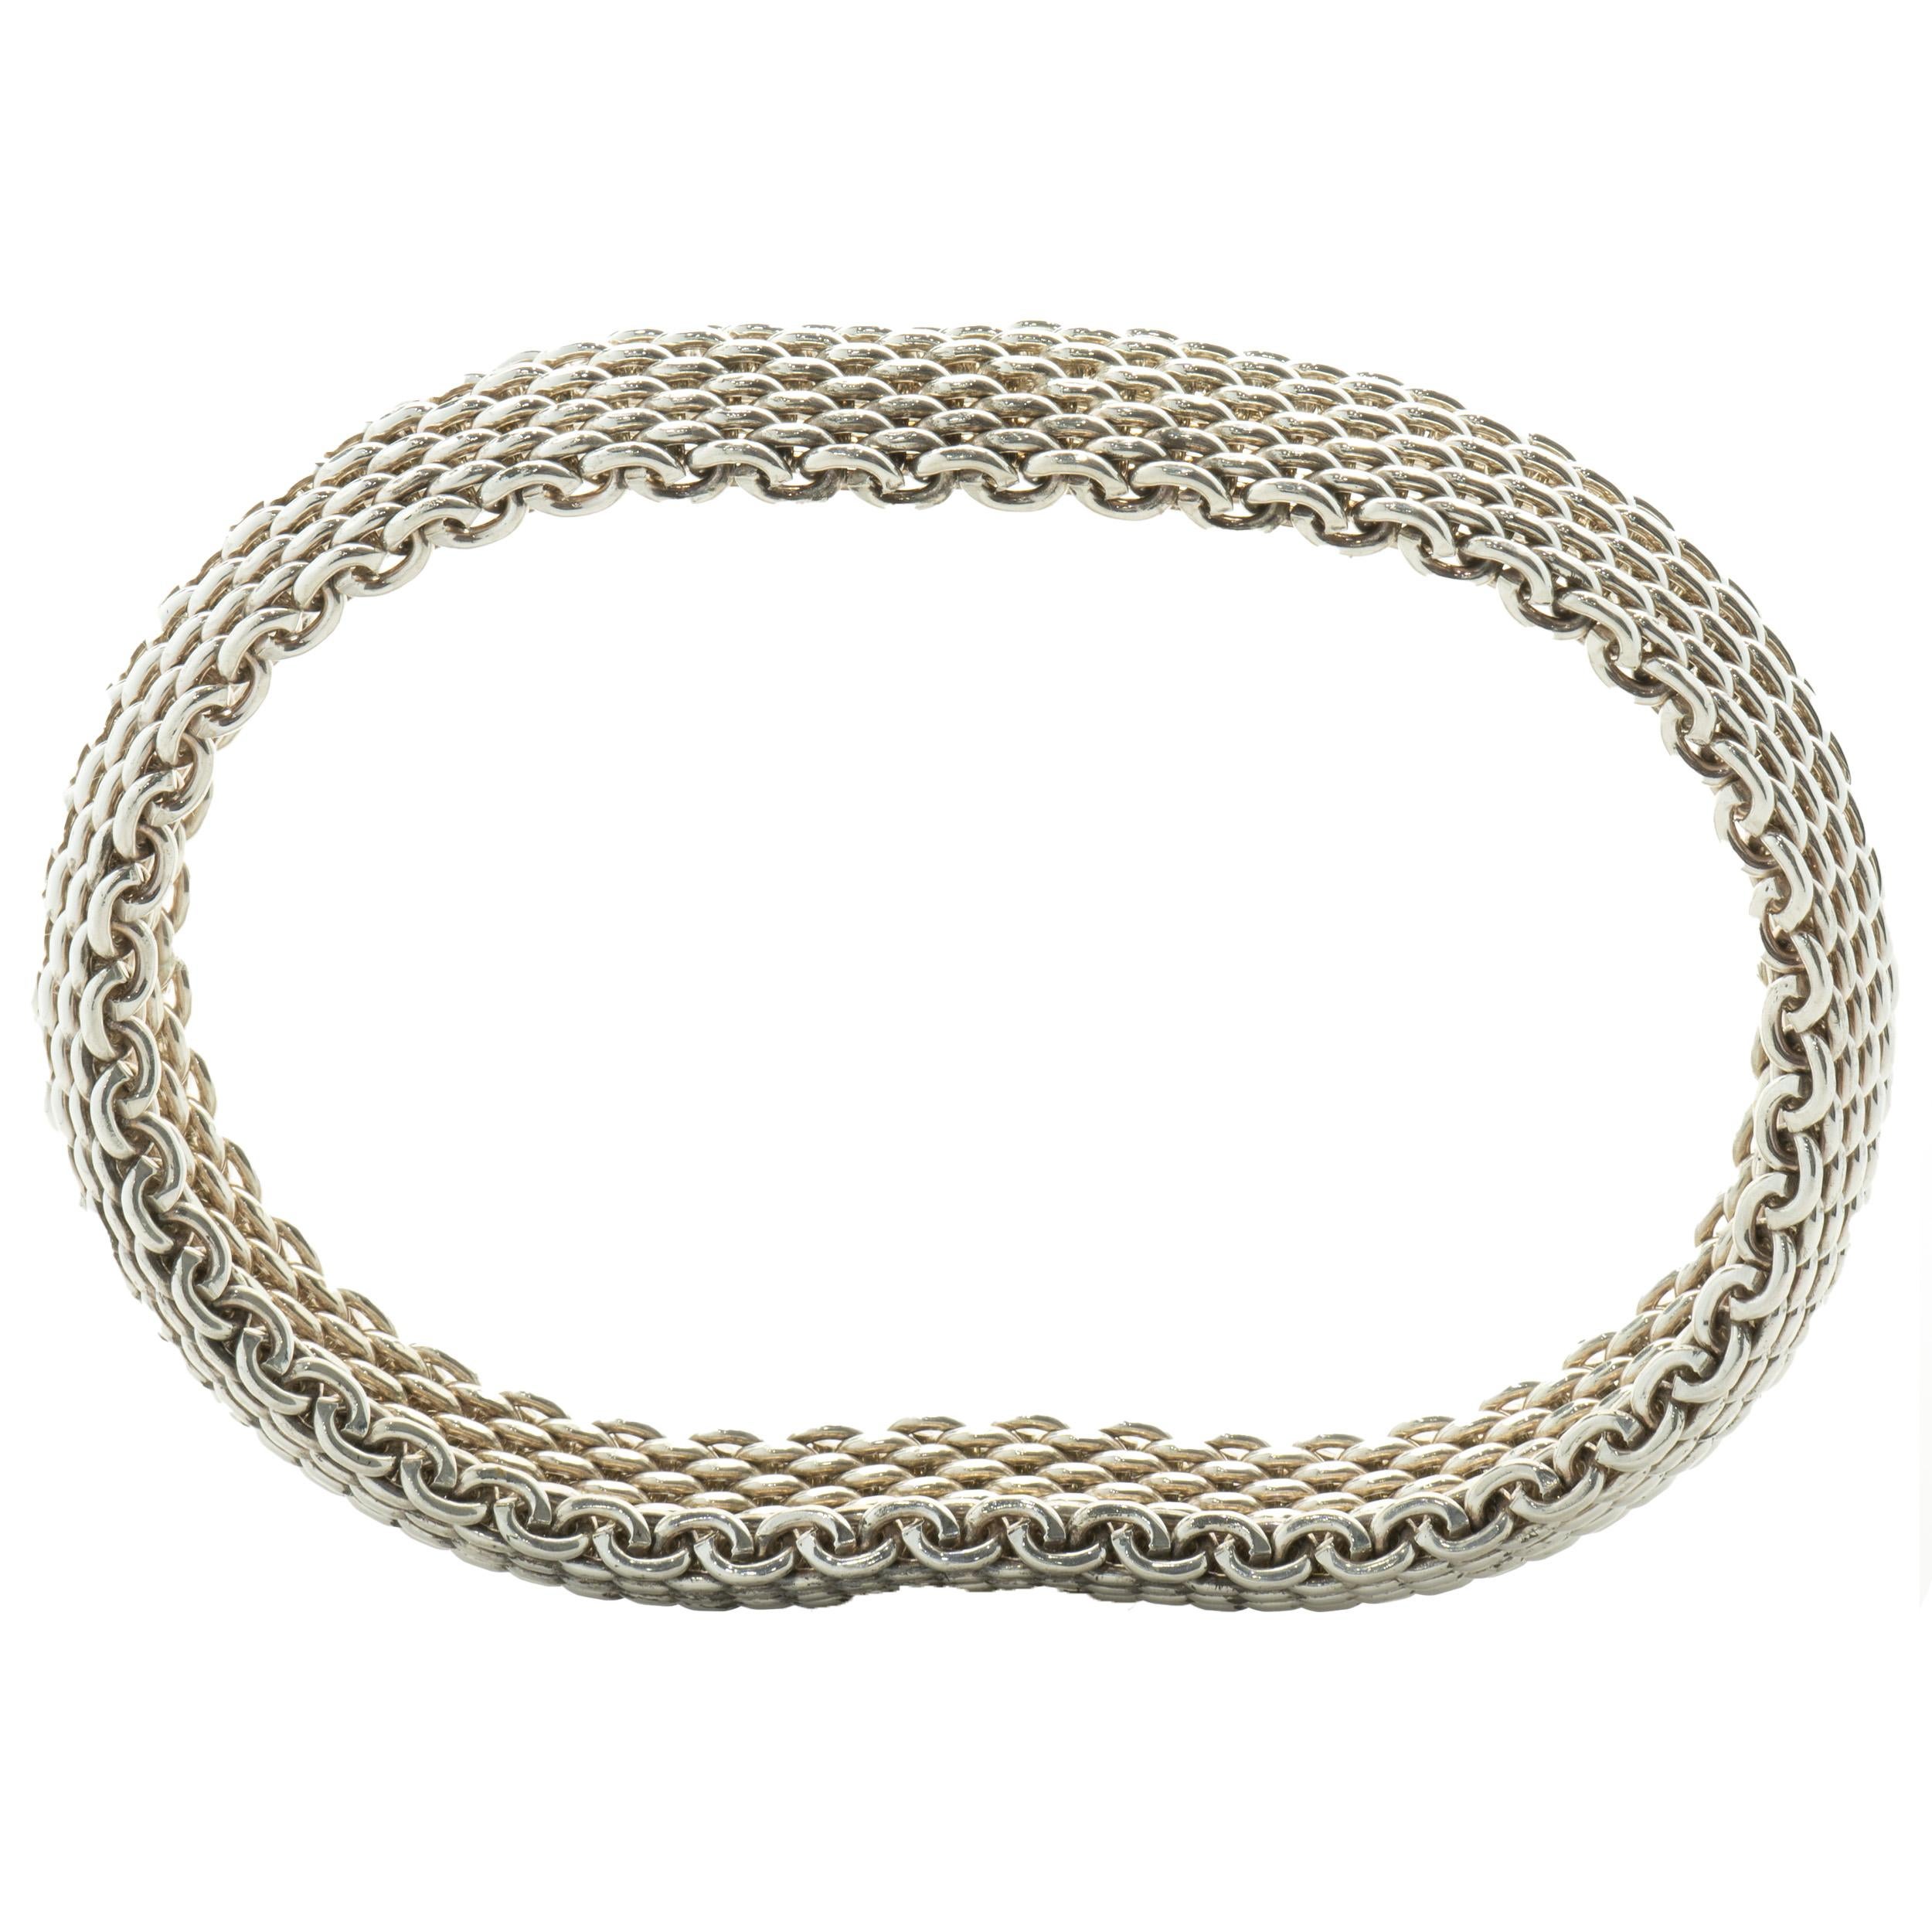 Designer: Tiffany & Co. 
Material: sterling silver
Dimensions: bracelet measures 15mm wide
Weight: 57 grams
Size: 7.5-inches

No box or papers included